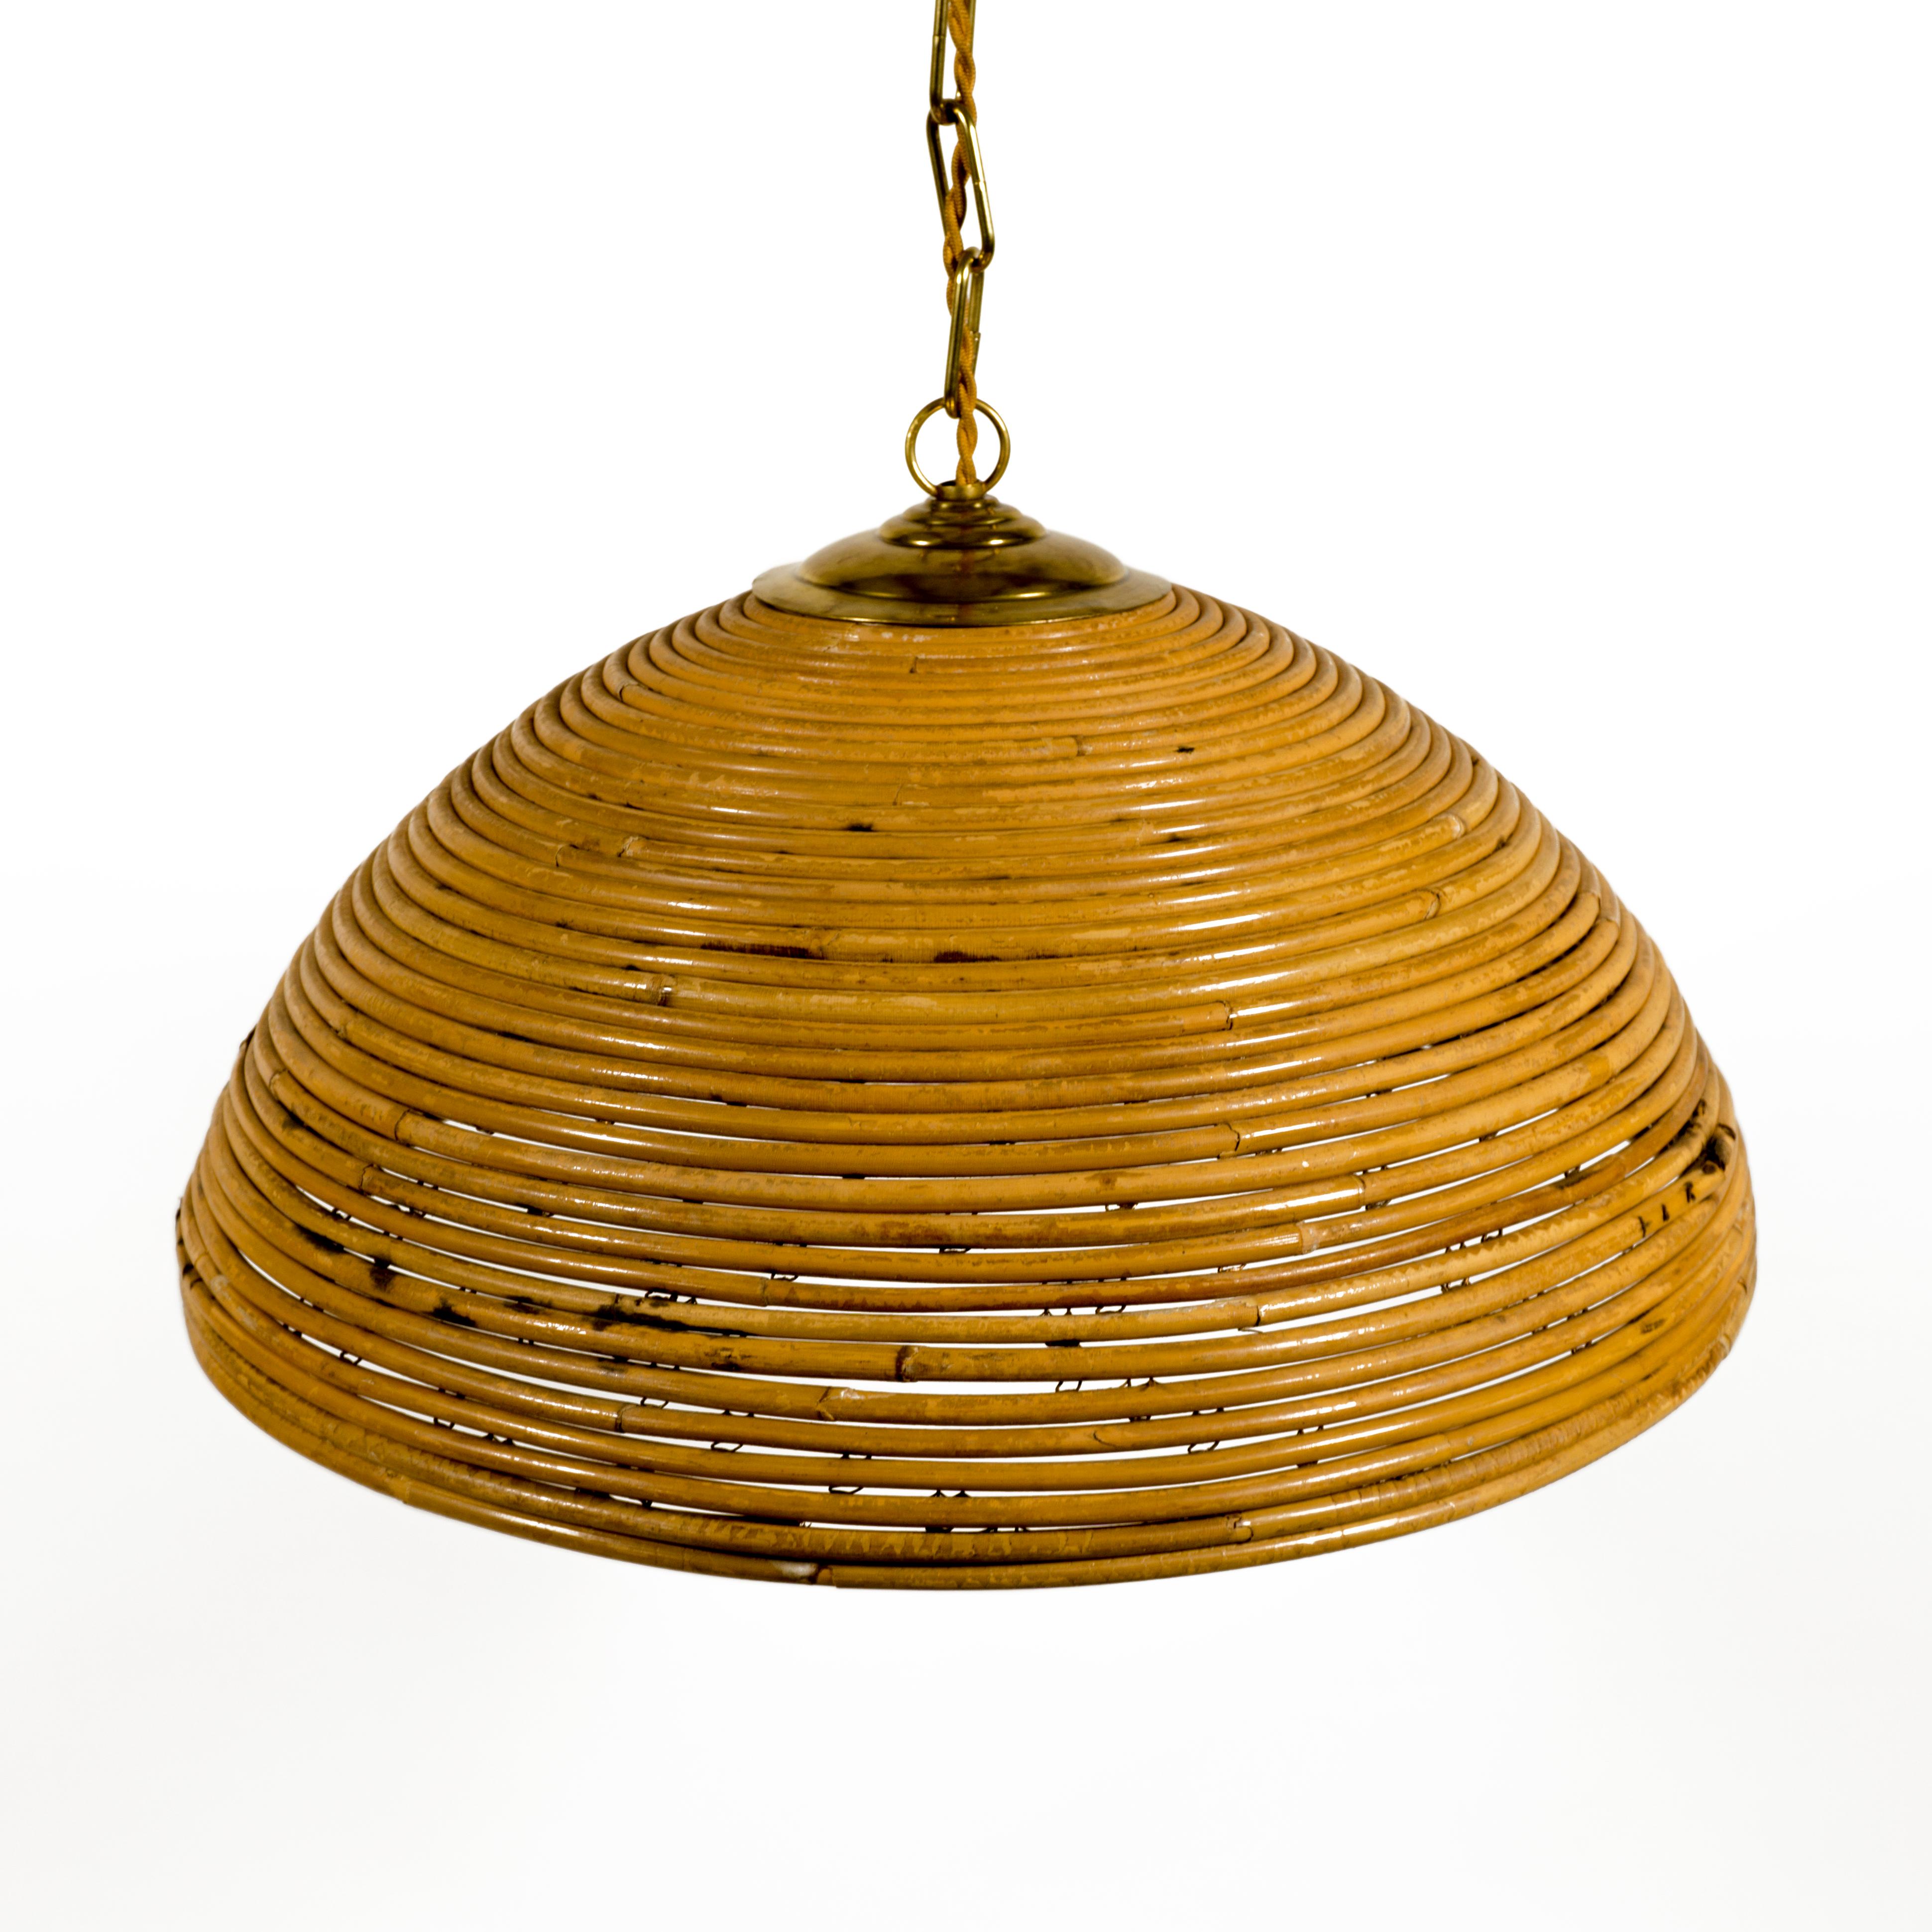 Gorgeous 1970s spiral-wrapped pencil reed dome shaped ceiling light with beautifully aged brass details. 1 E27 socket. 
Great italian mid century modern design. Attributed to Vivai del Sud. 
Very good vintage 100% original condition. Made in Italy.